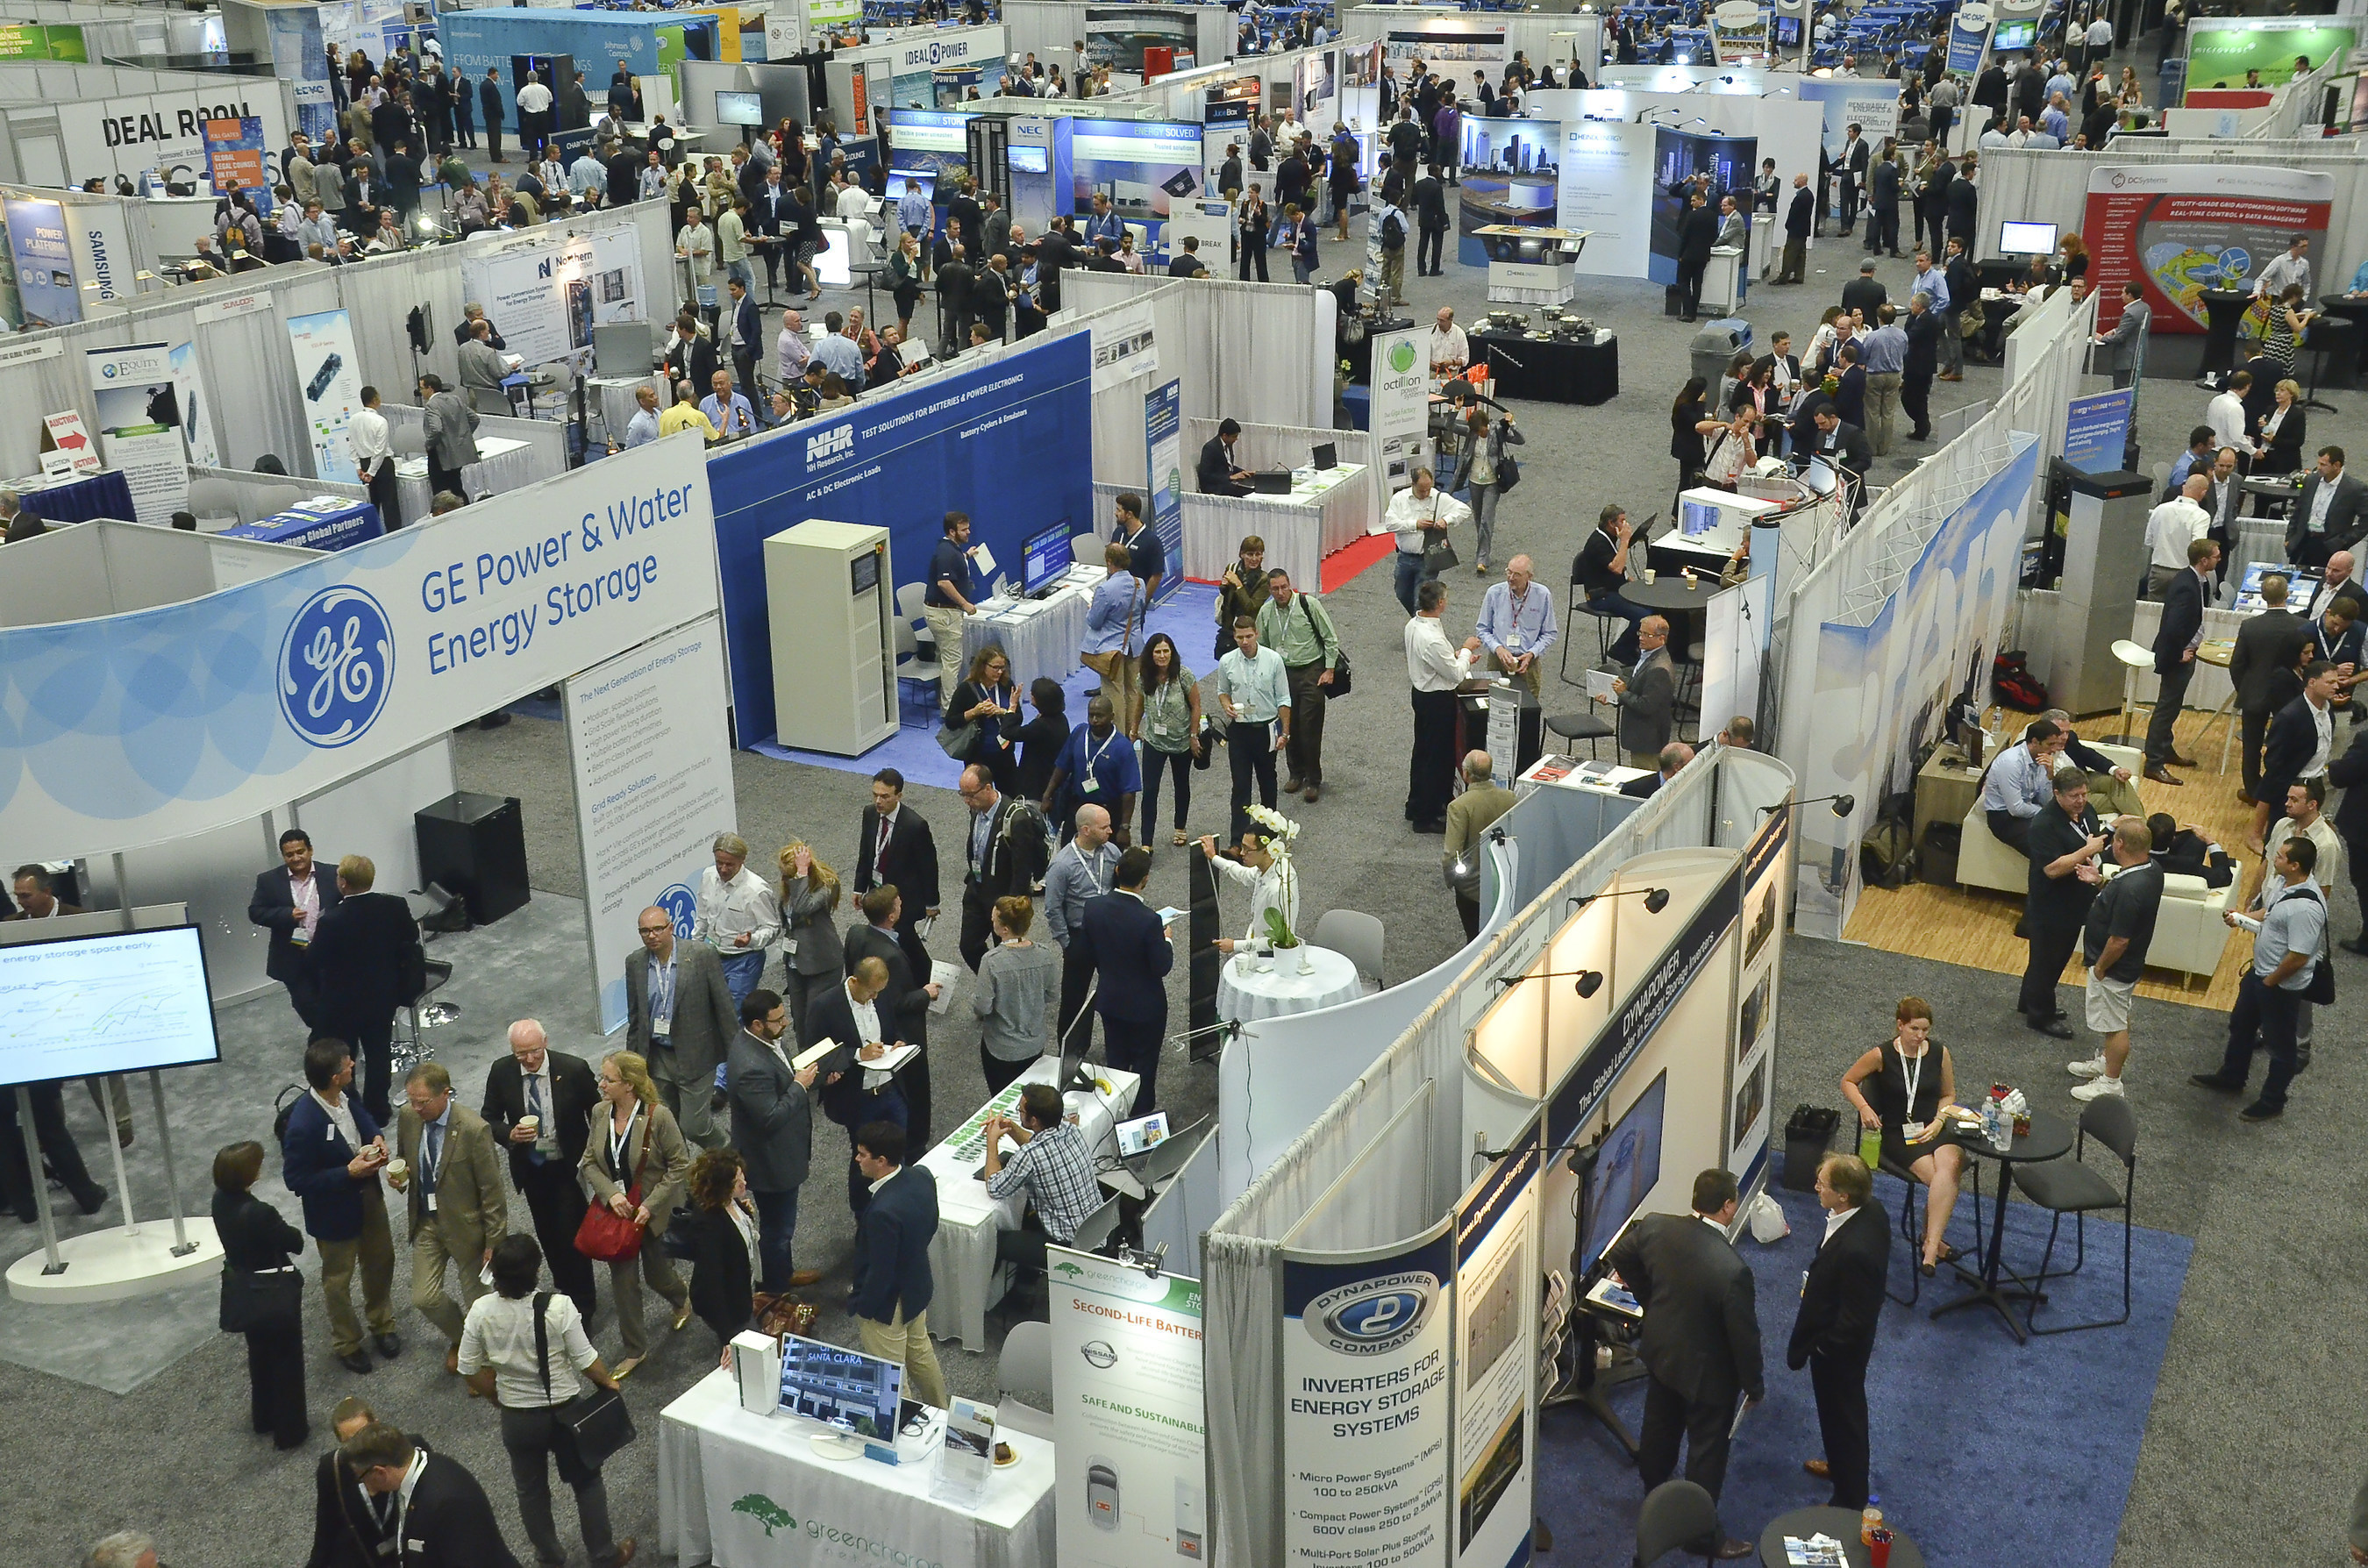 Expo floor at Energy Storage North America in San Diego California on October 14, 2015